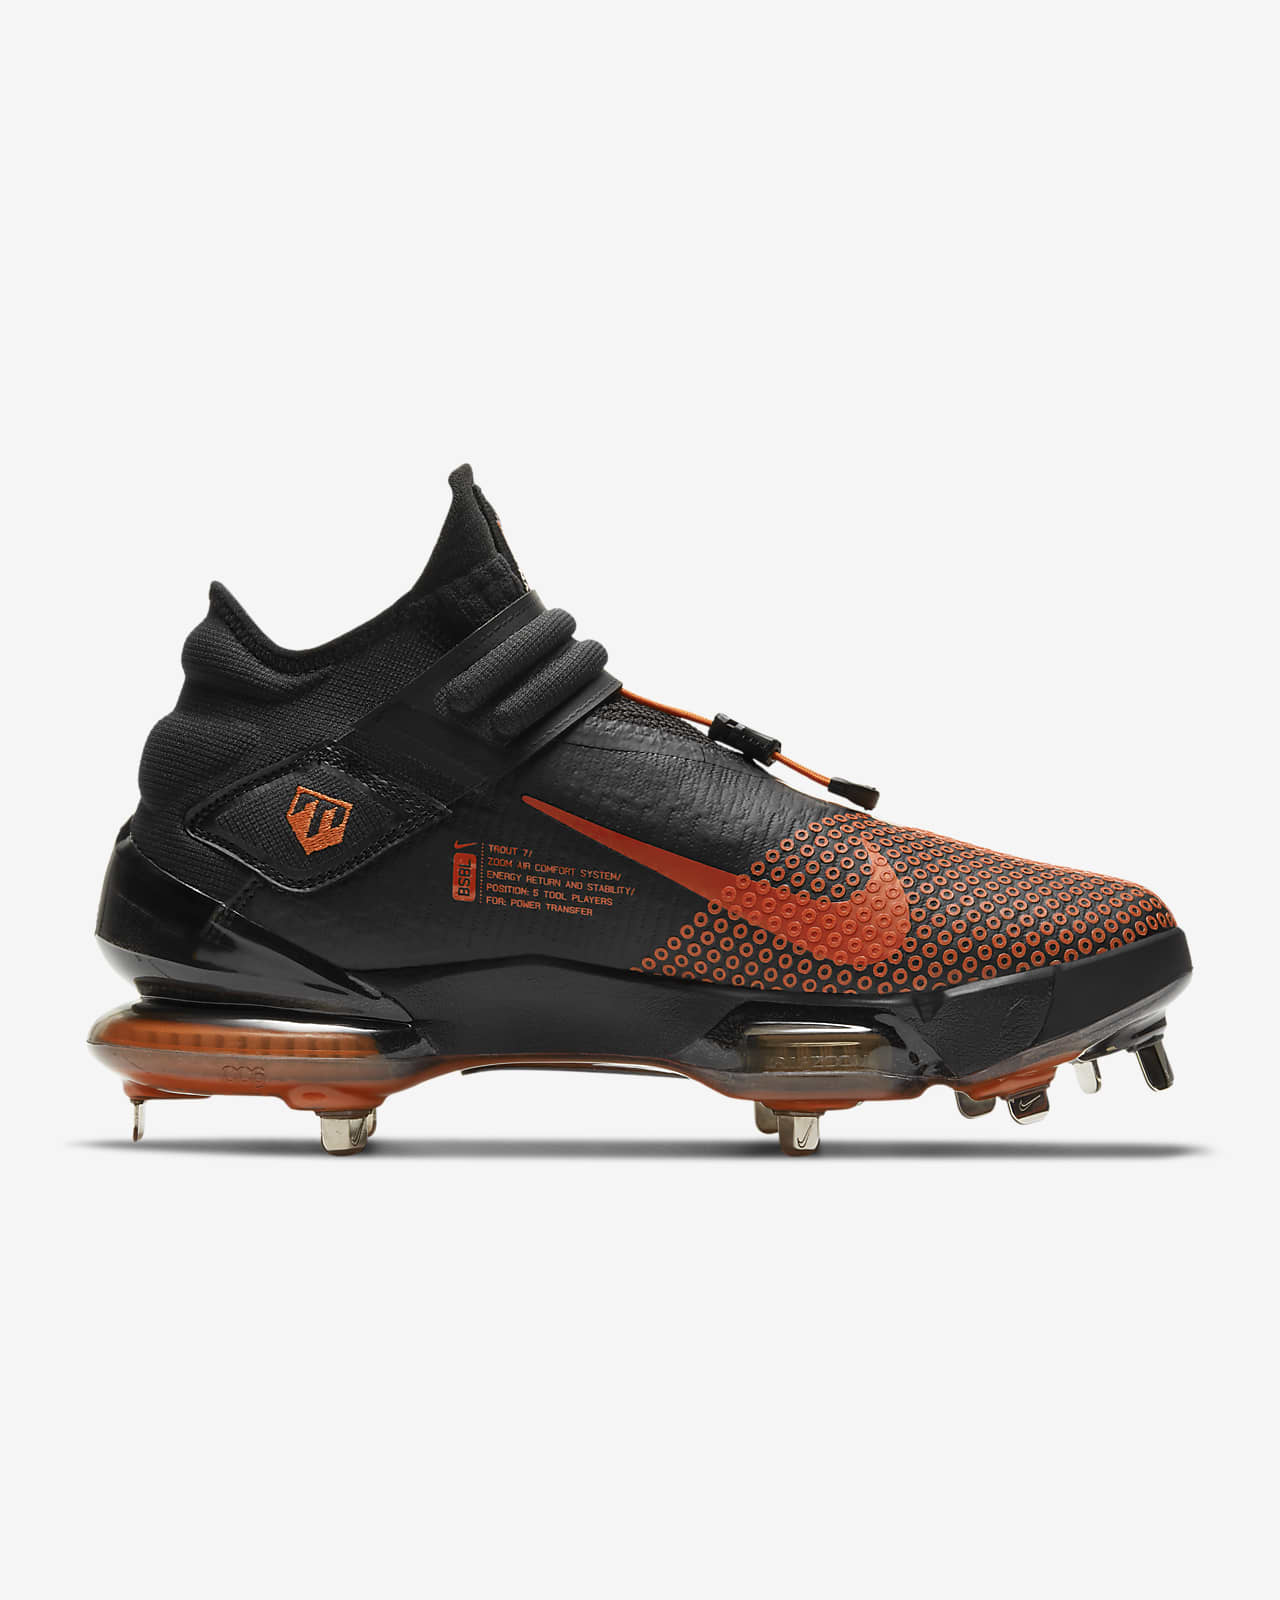 nike men's force zoom trout 5 baseball cleats